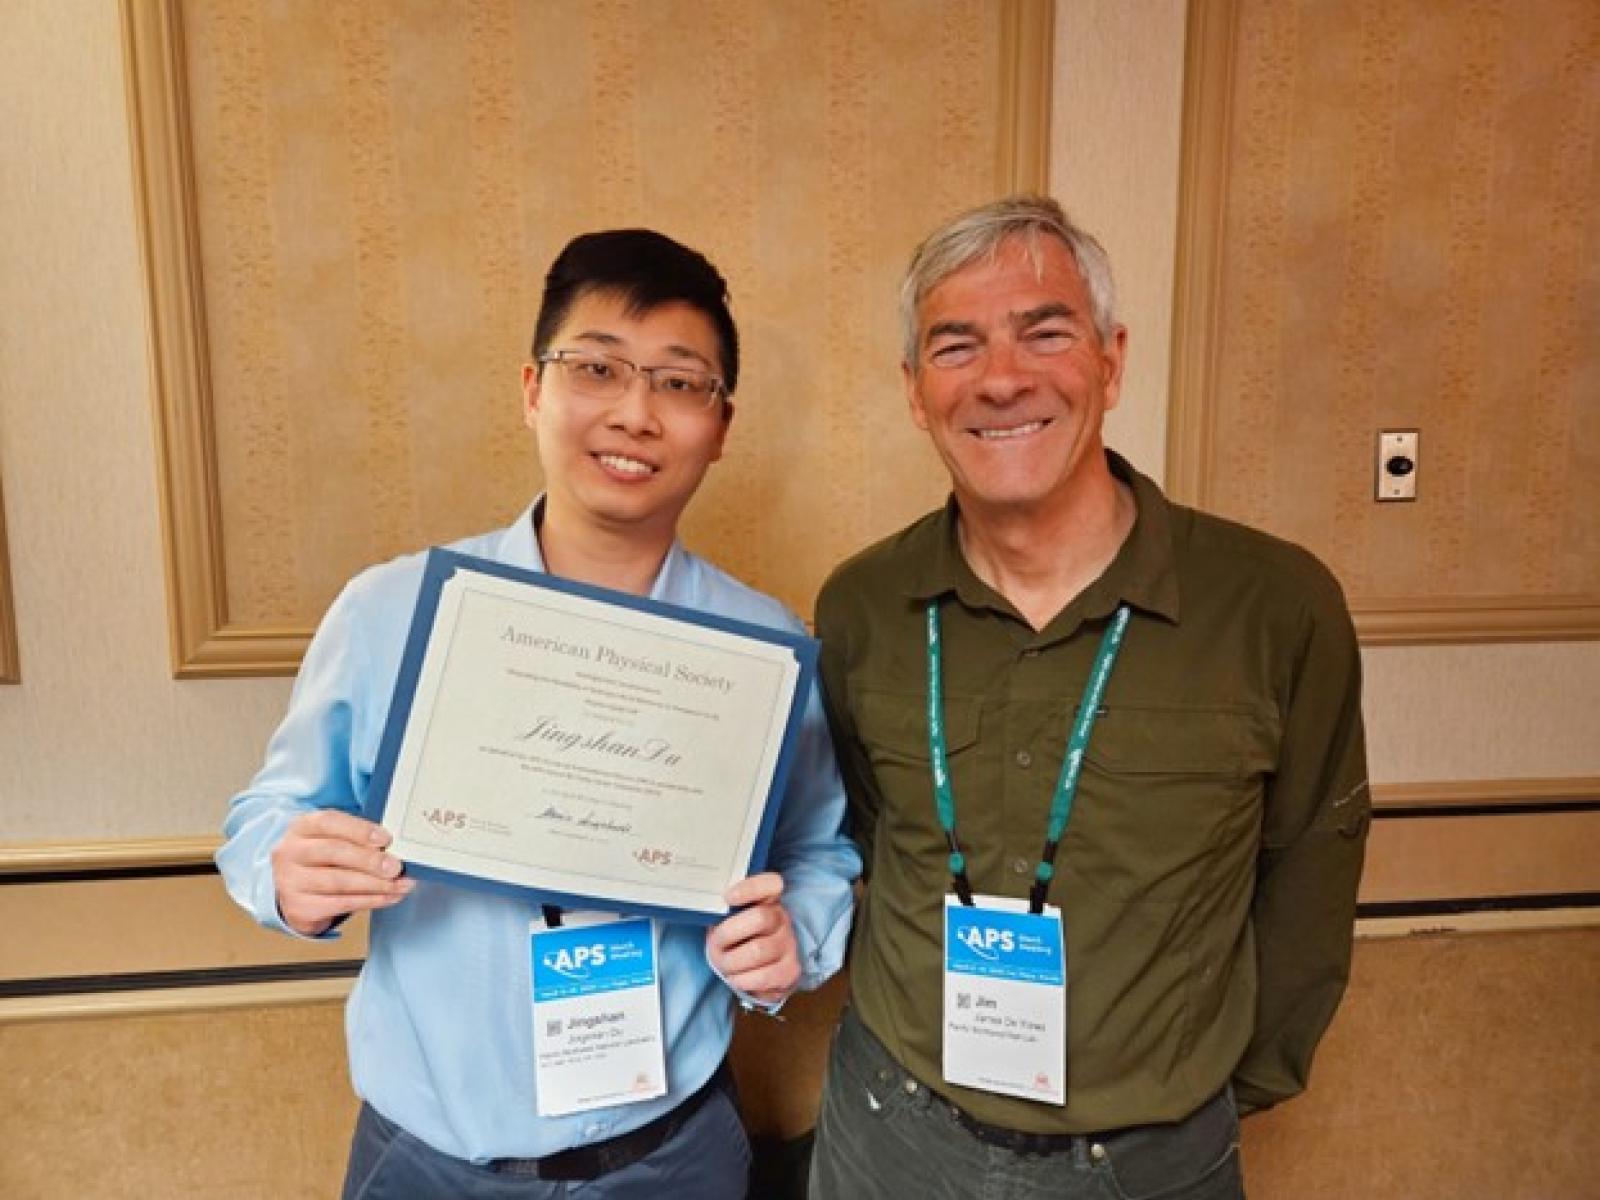 Photograph of two people smiling at a conference. The person on the left is holding an award certificate.